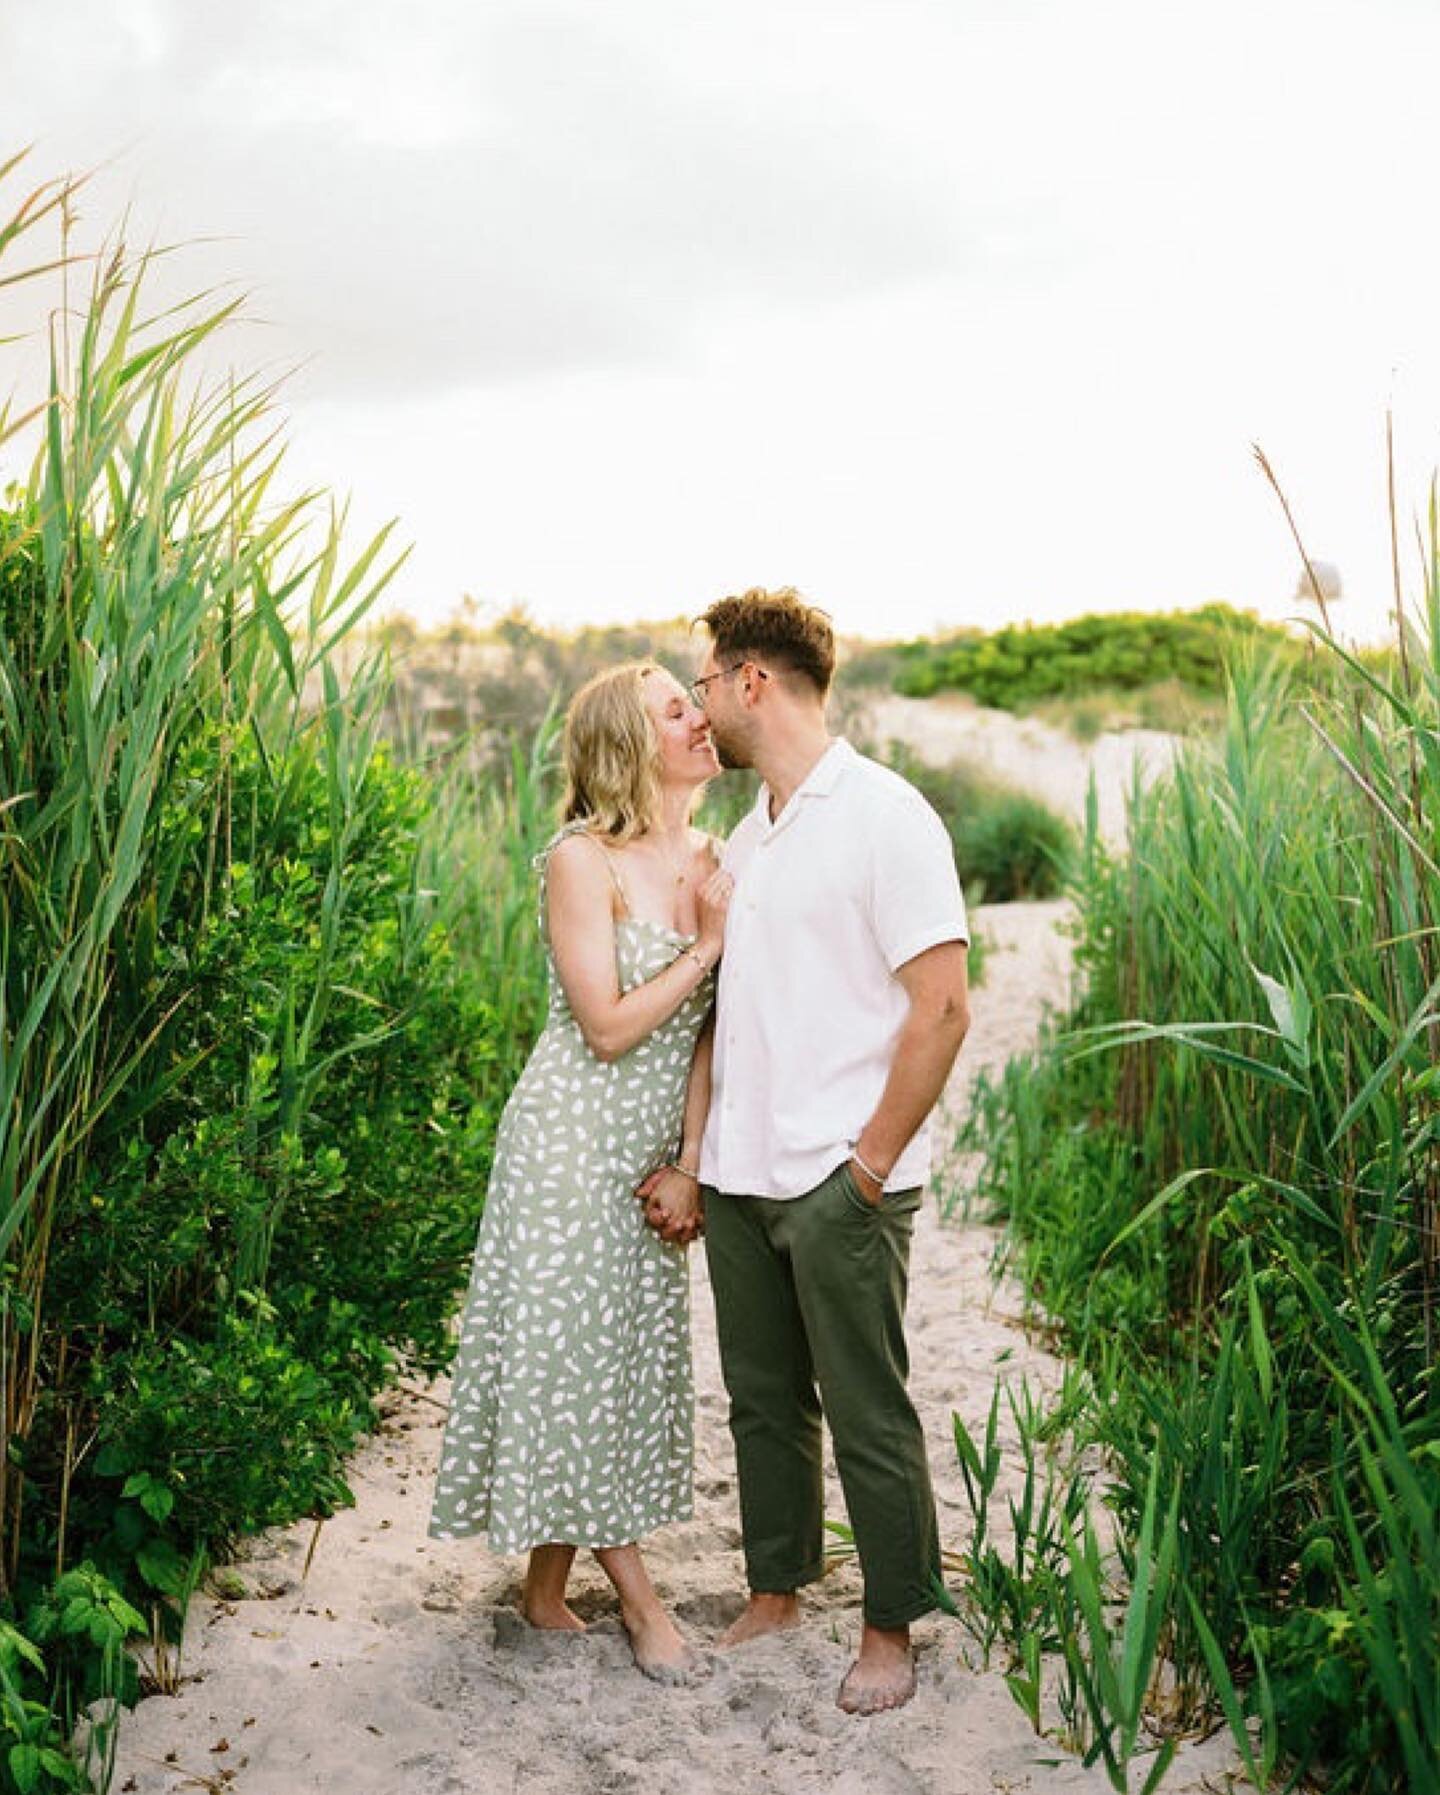 When she says yes and the light is just right 🙌💍🌾
@jamesanundson @emma_oshea 
.
.
.
.
.
#engaged💍 #proposalpaparazzi #proposalphotographer #engagementphotosession #njengagement #njengagementphotographer #barnegatlight #lbiengagement #lbi #thearch